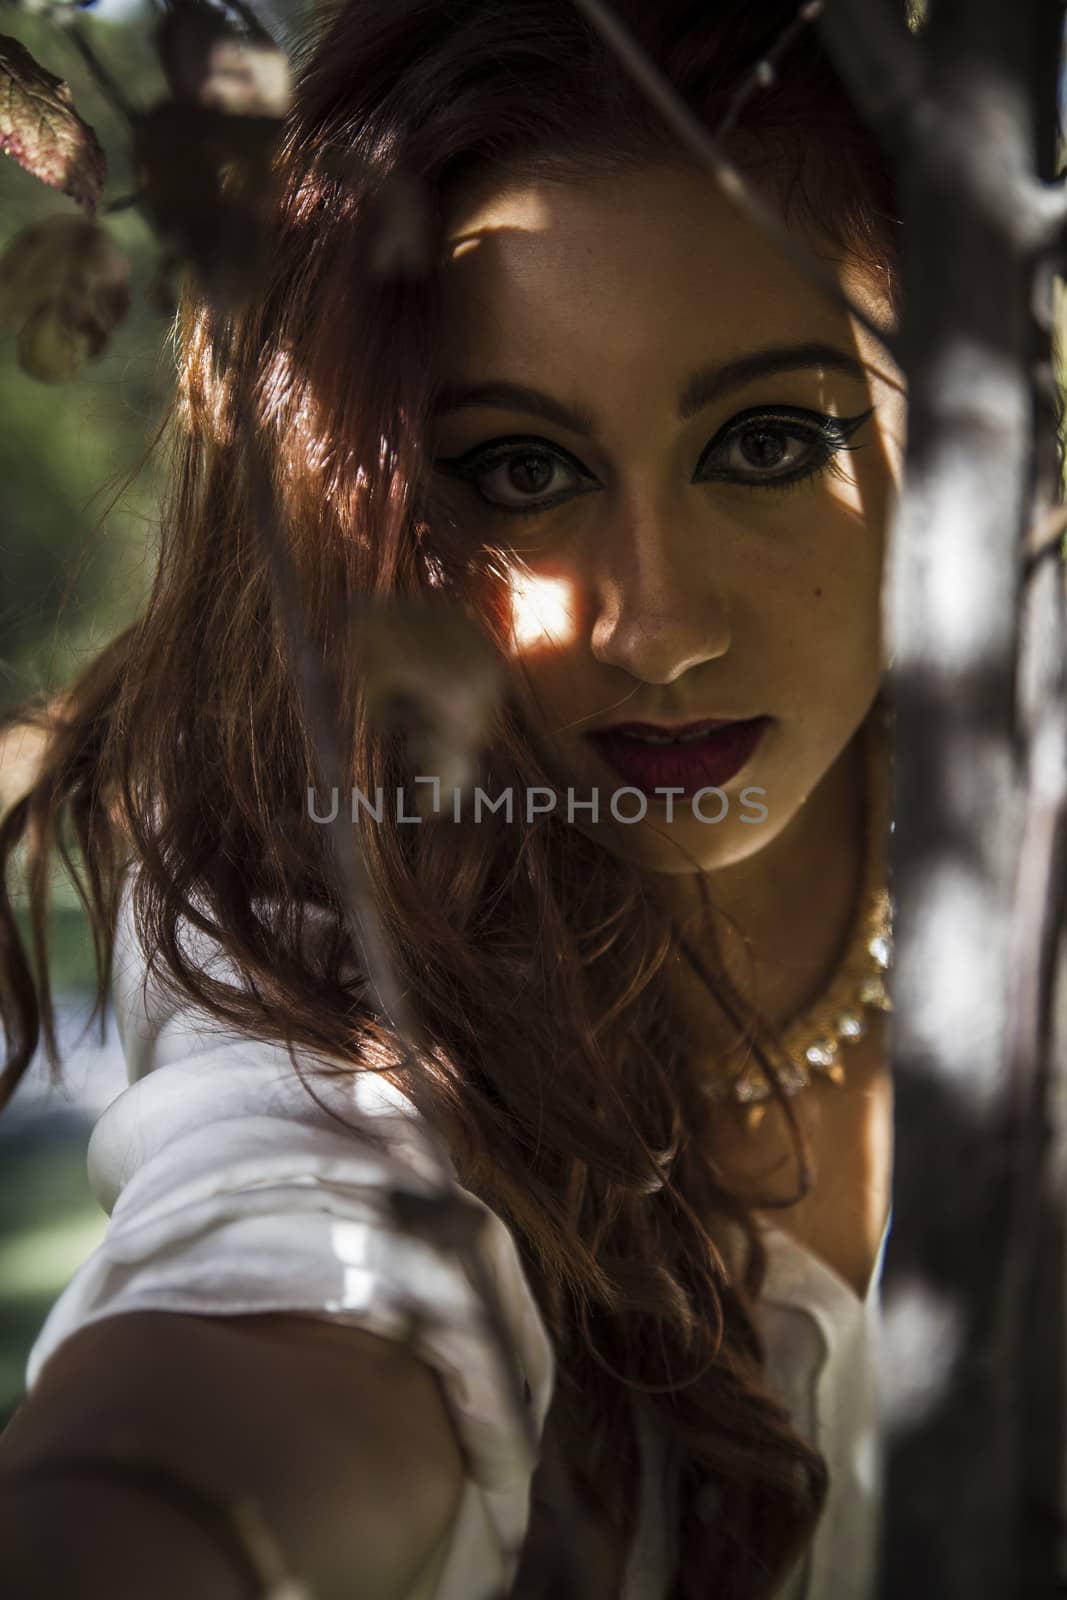 Sensual girl in spring or summer forest park full of hope and vi by FernandoCortes